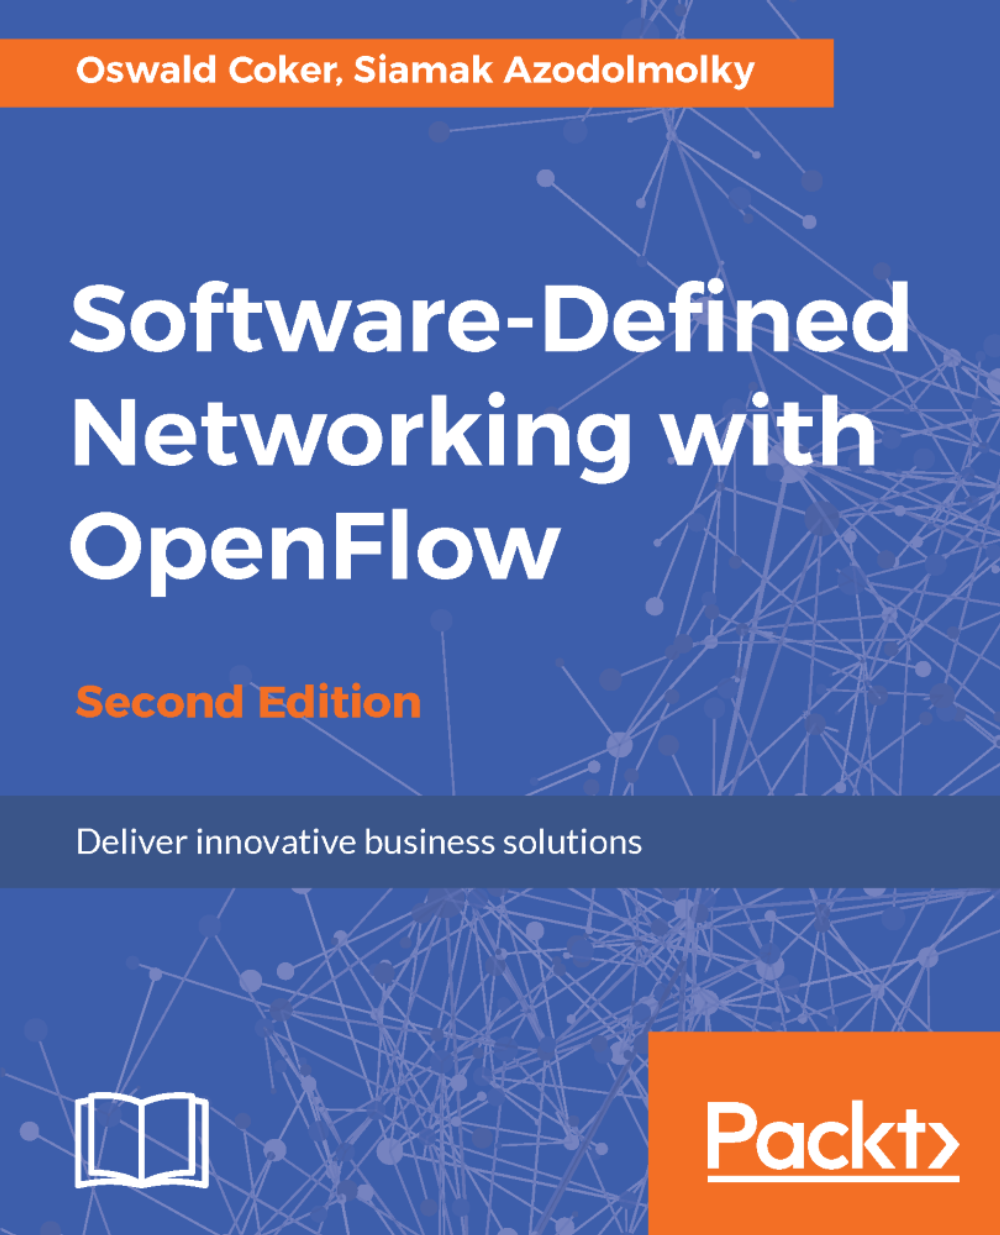 Software-Defined Networking with OpenFlow - Second Edition | ebook